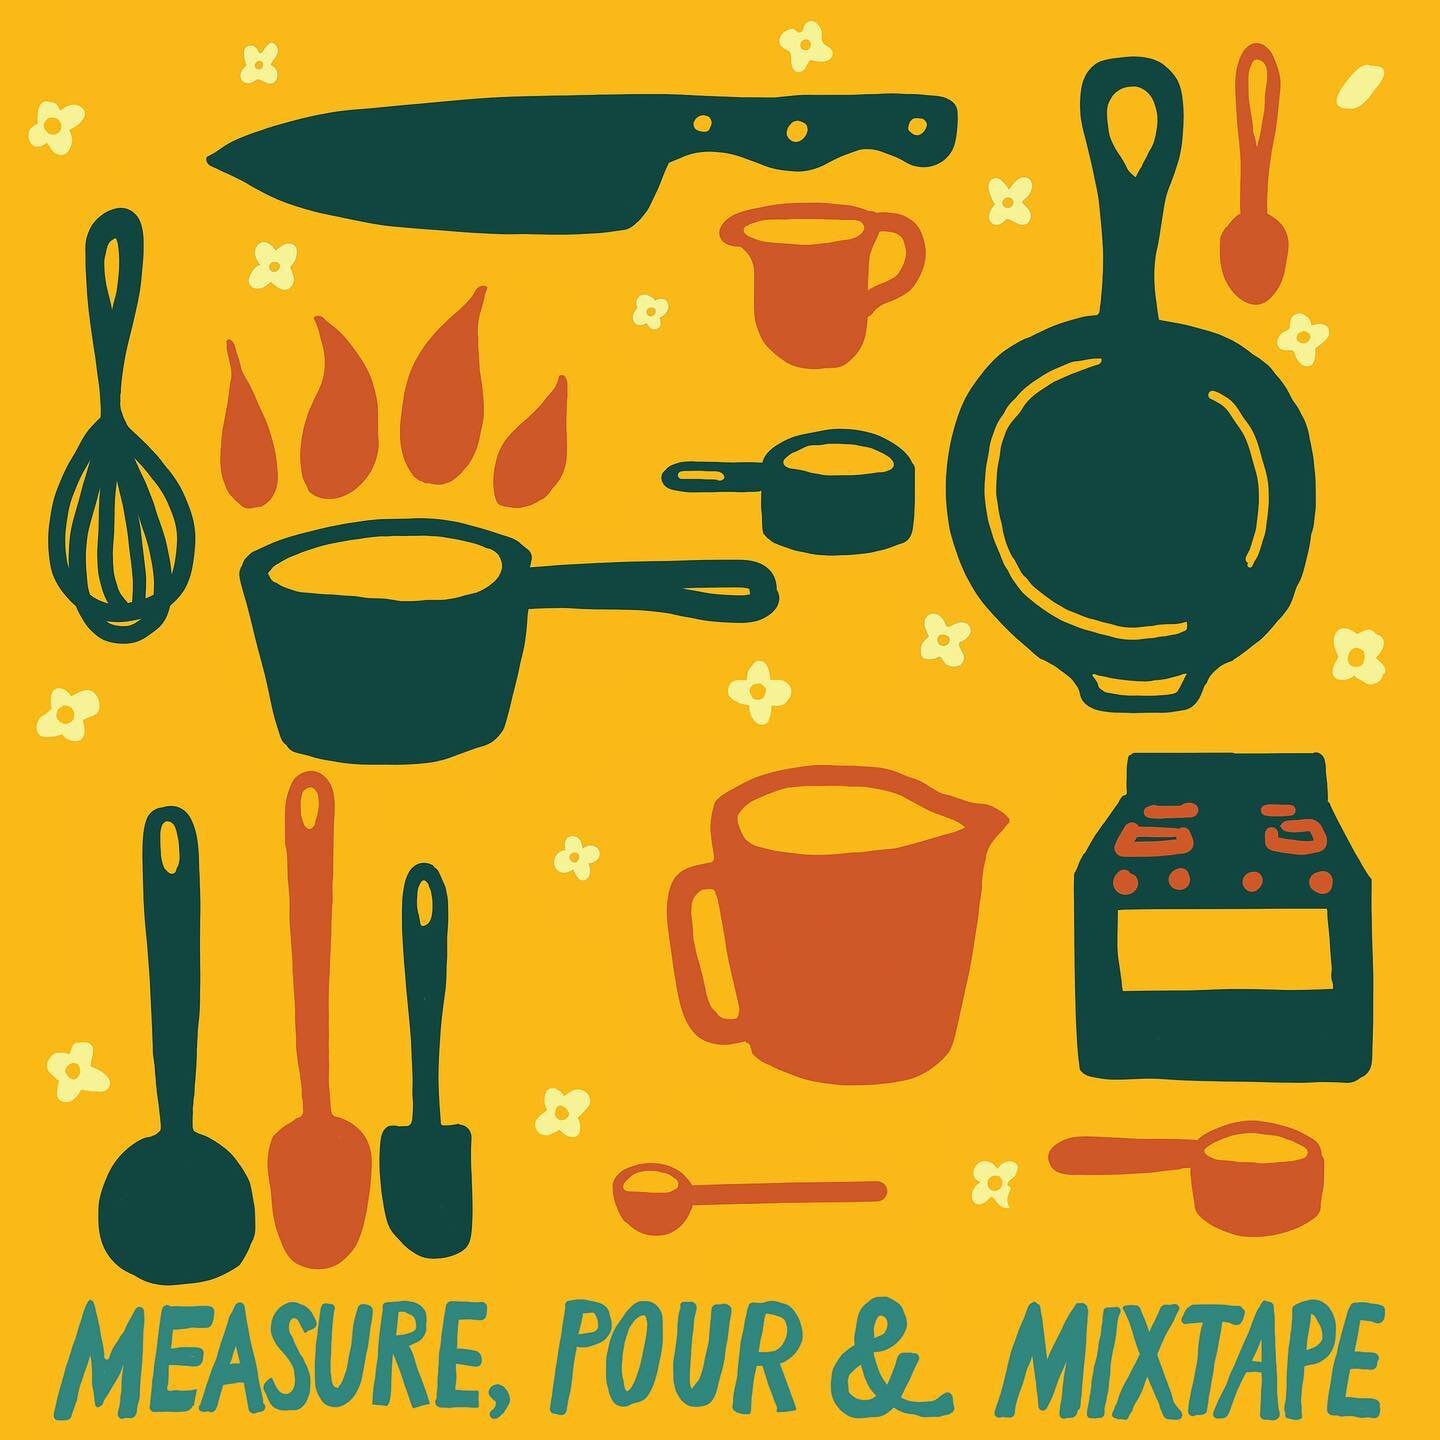 We're thrilled to launch preorders of our forthcoming release, MEASURE, POUR &amp; MIXTAPE: MUSIC FOR COOKING, featuring previously unreleased tracks by Michael Hurley, BELLS (@be__lls), Avey Tare of Animal Collective (@aaaveytttare), Magic Tuber Str